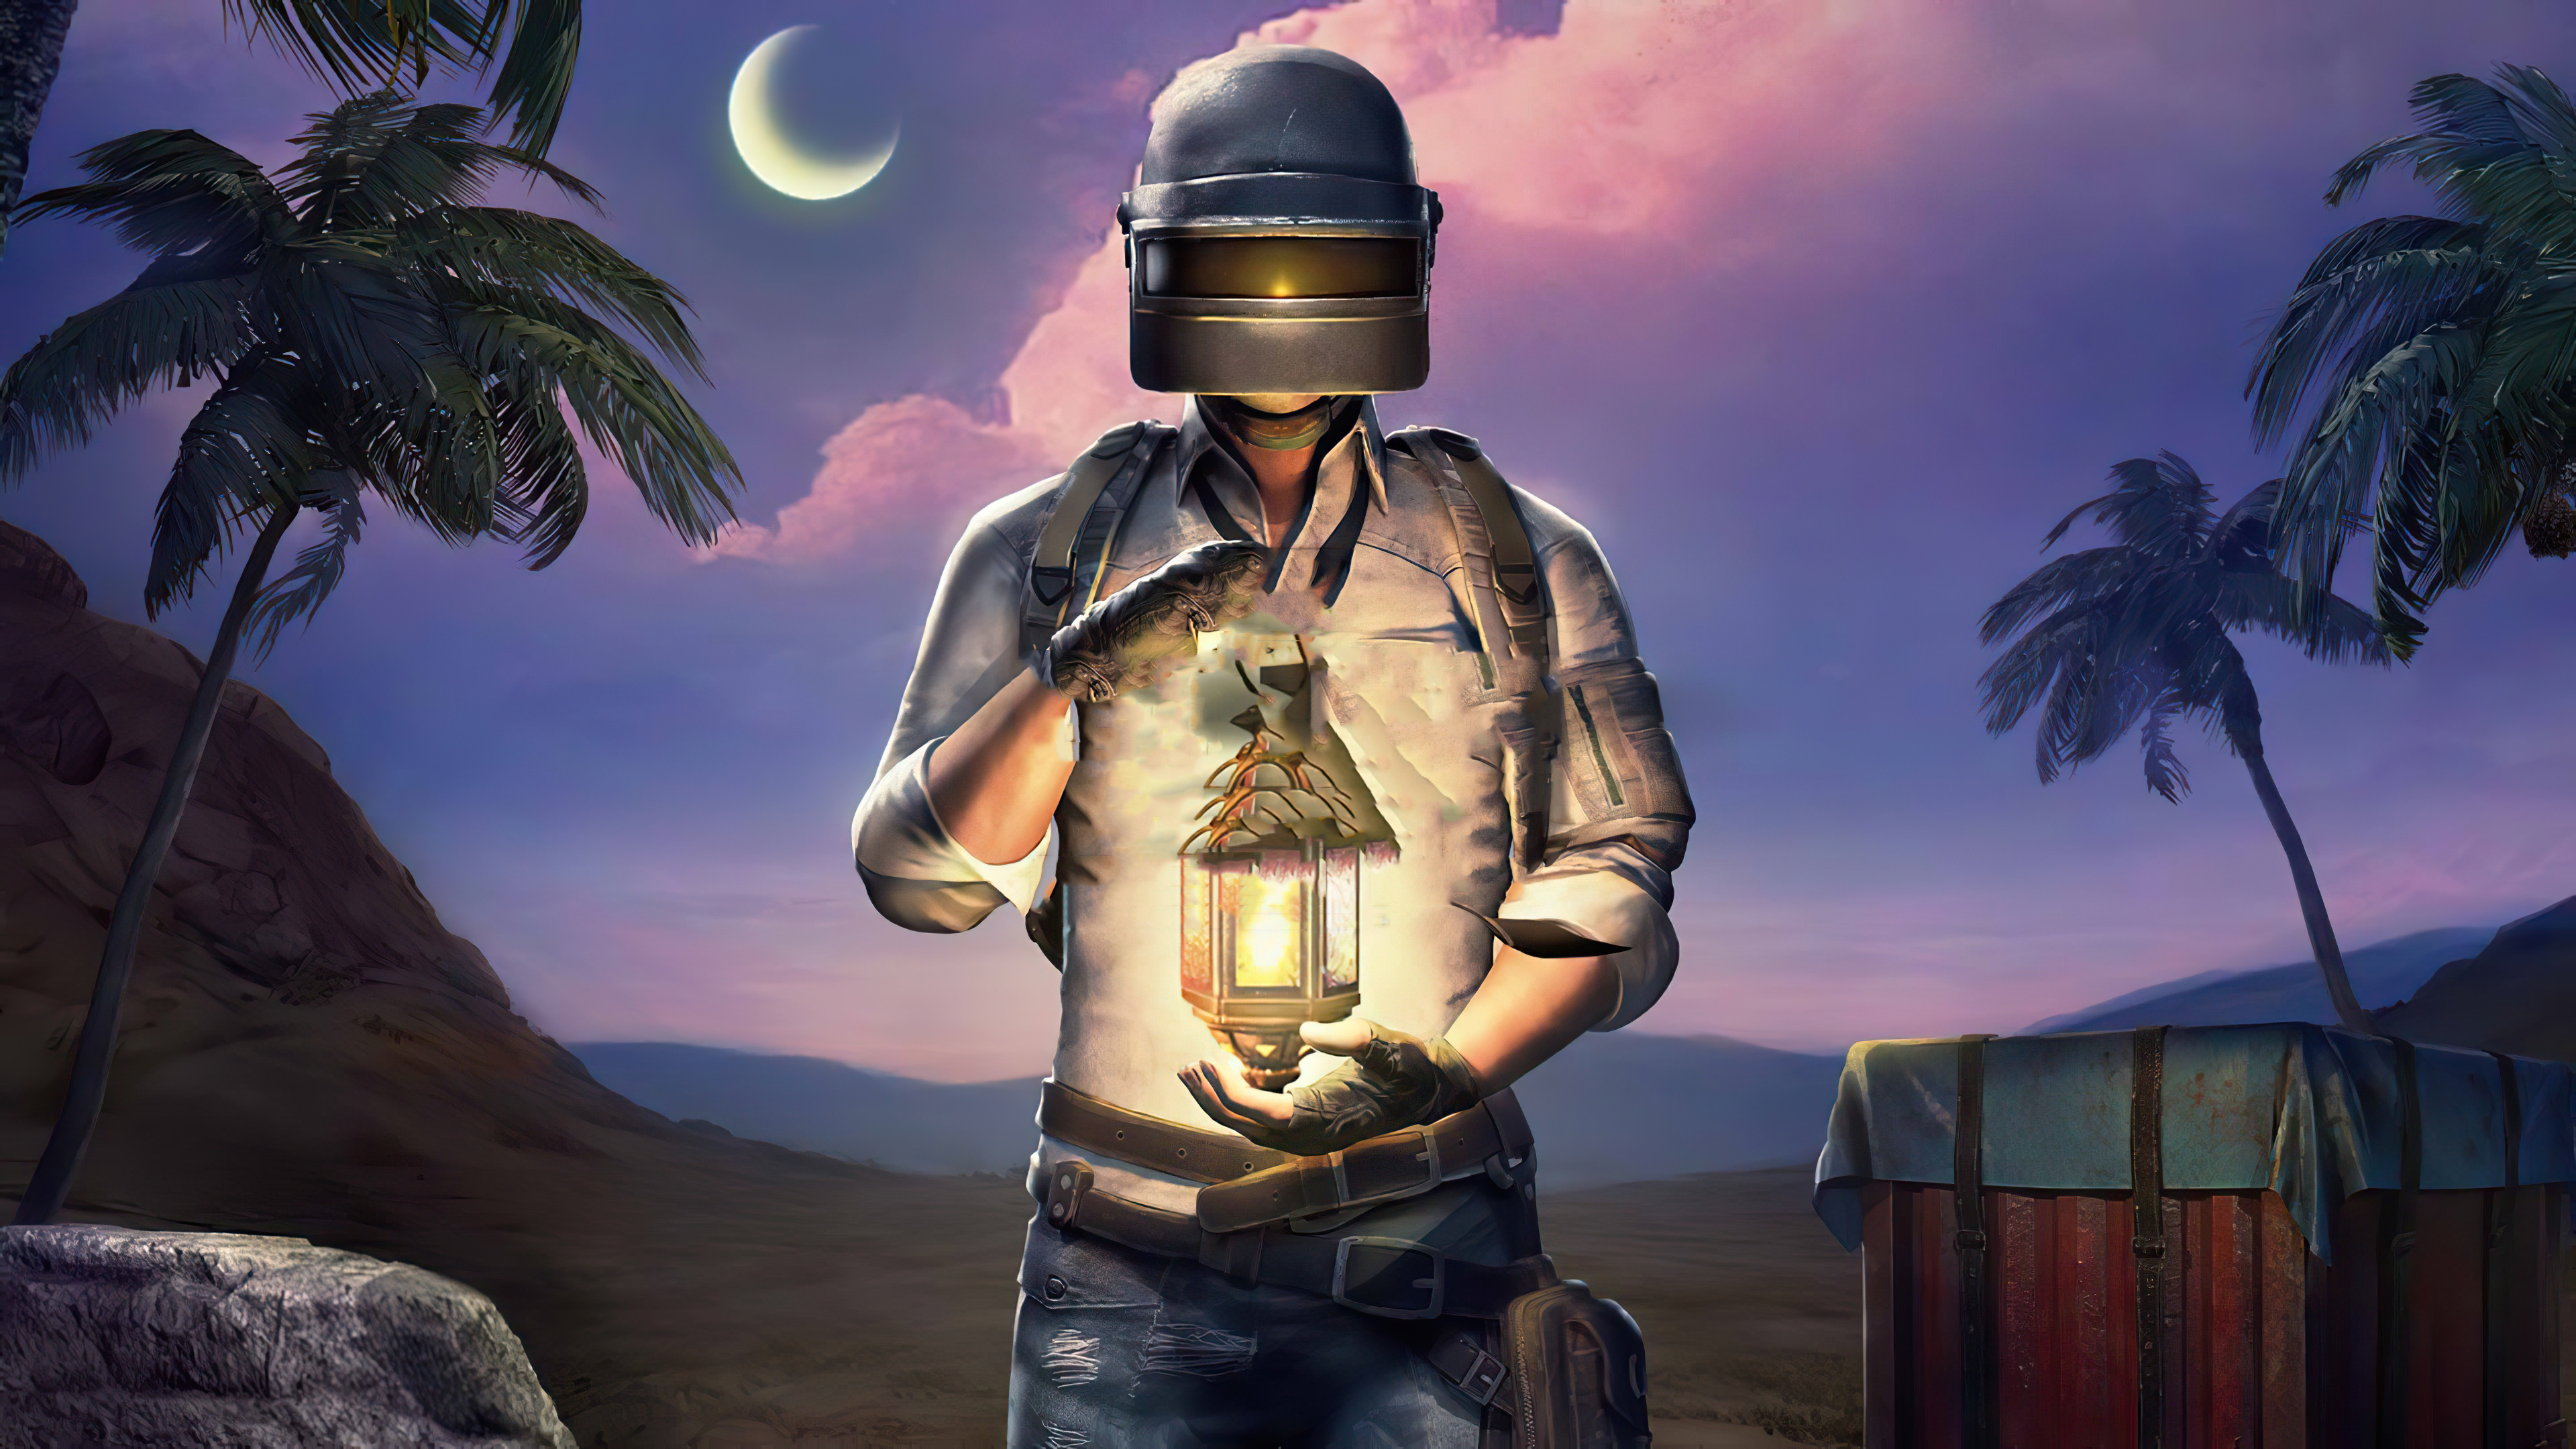 3840x Pubg Mobile Jungle 3840x Resolution Wallpaper Hd Games 4k Wallpapers Images Photos And Background Wallpapers Den